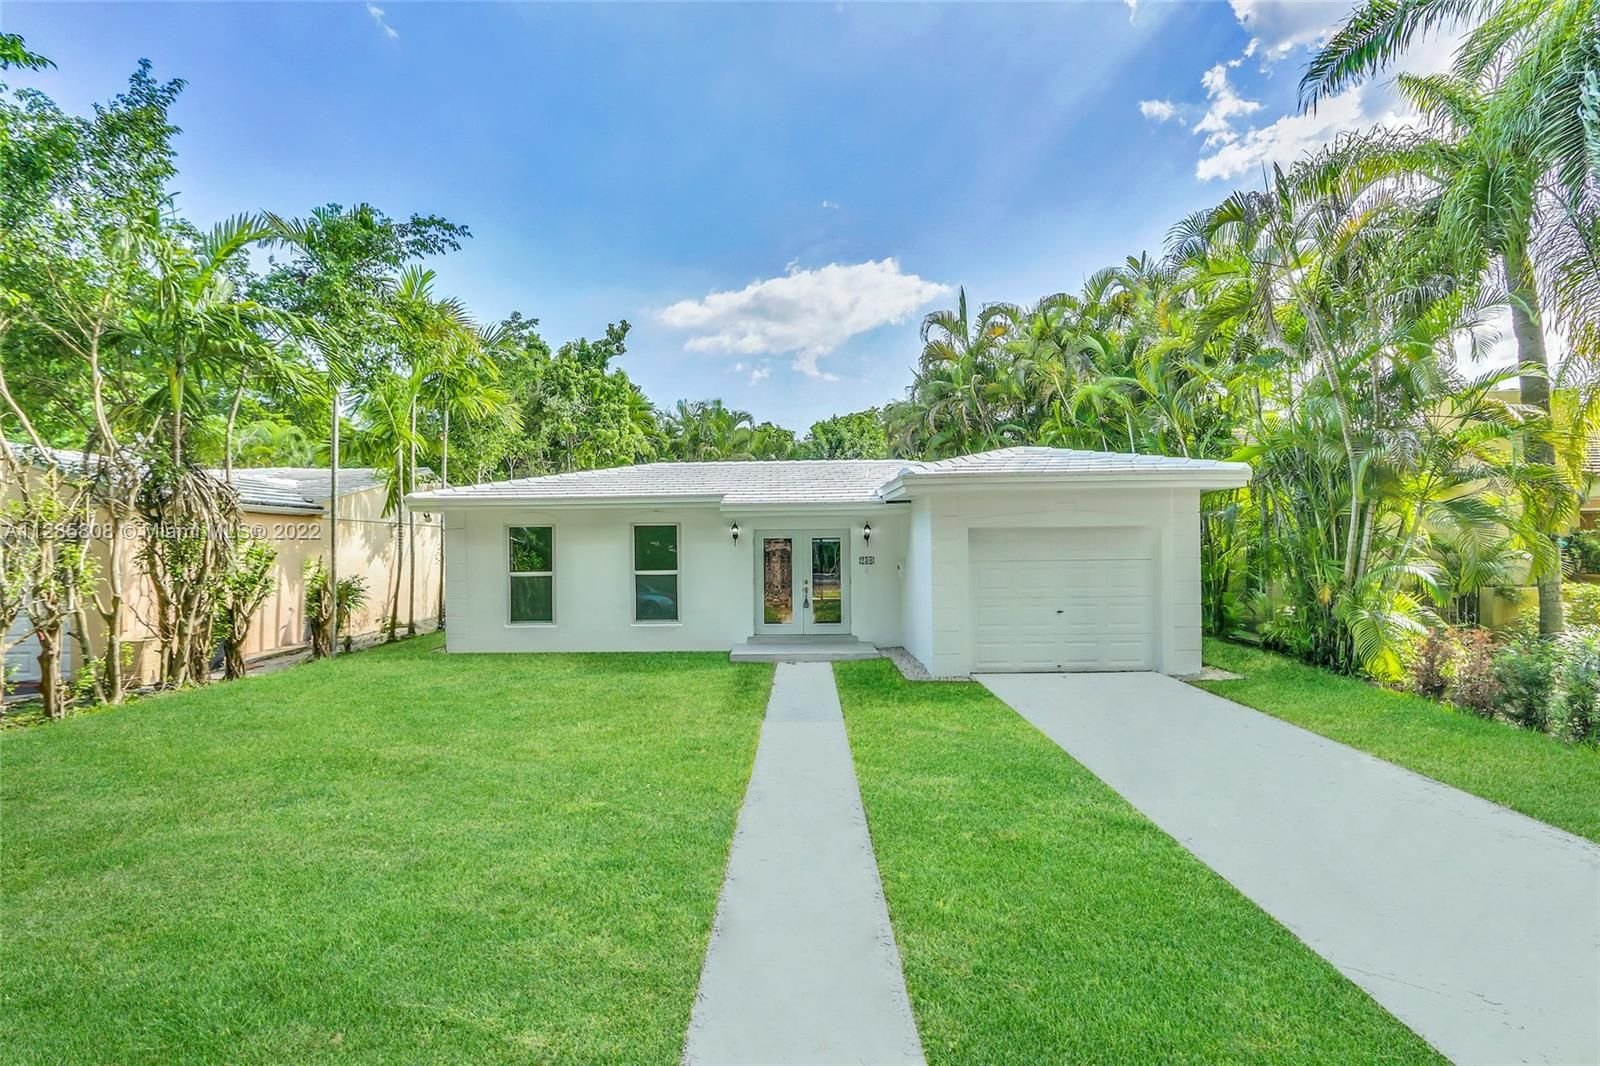 Real estate property located at 230 Fluvia Ave., Miami-Dade County, Coral Gables, FL